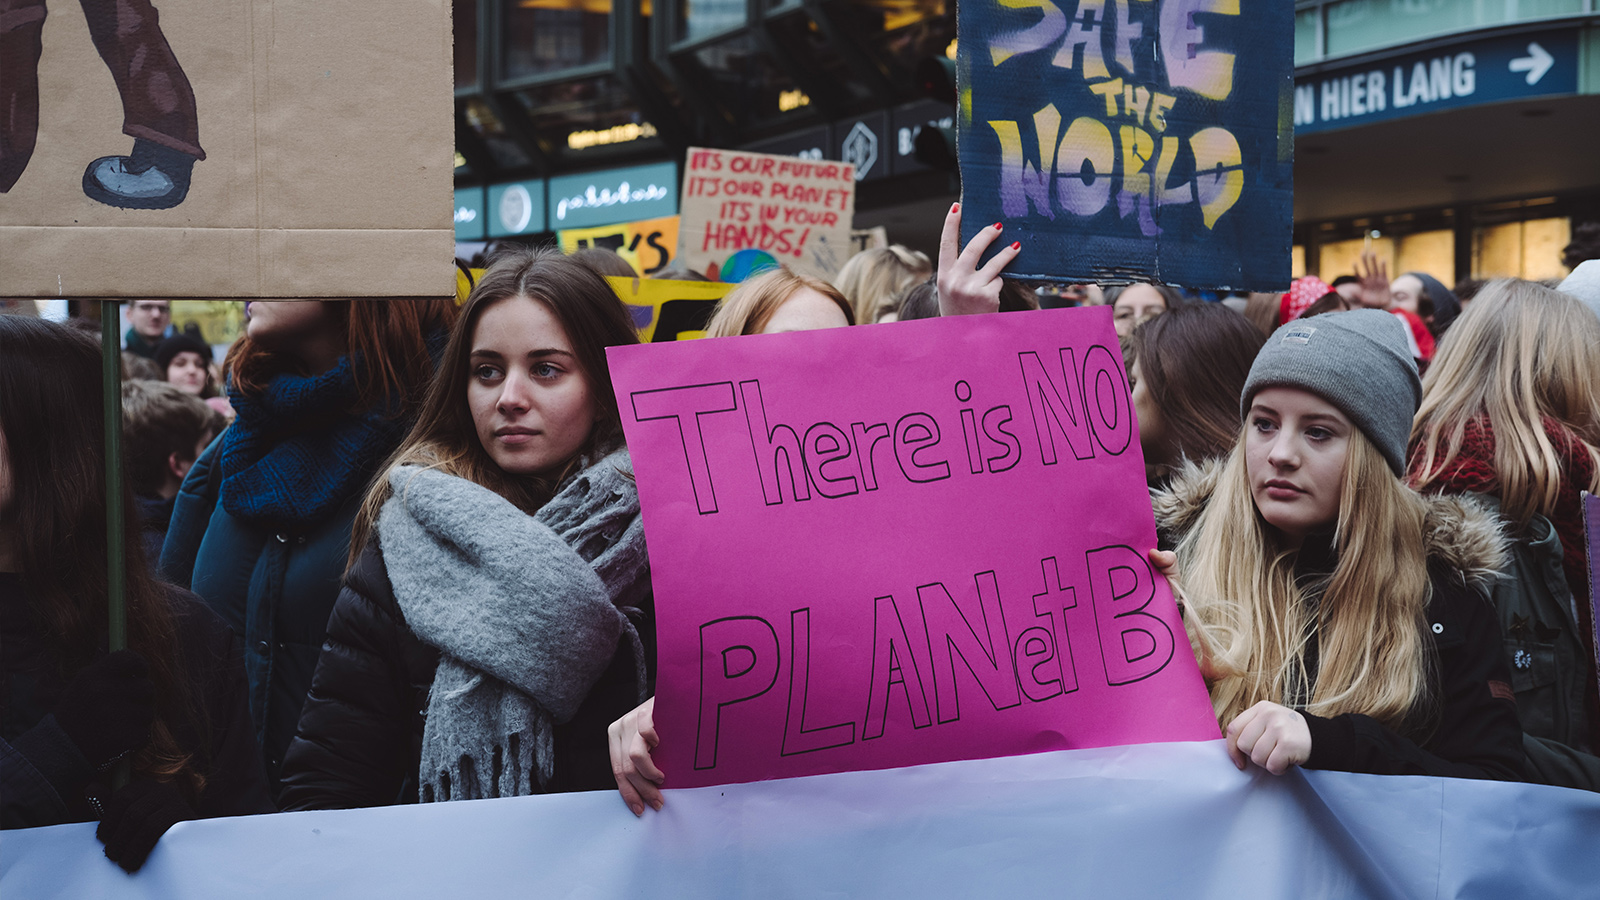 ecosia-joins-climate-strike-march-fridays-for-the-future-greta-thunberg-4